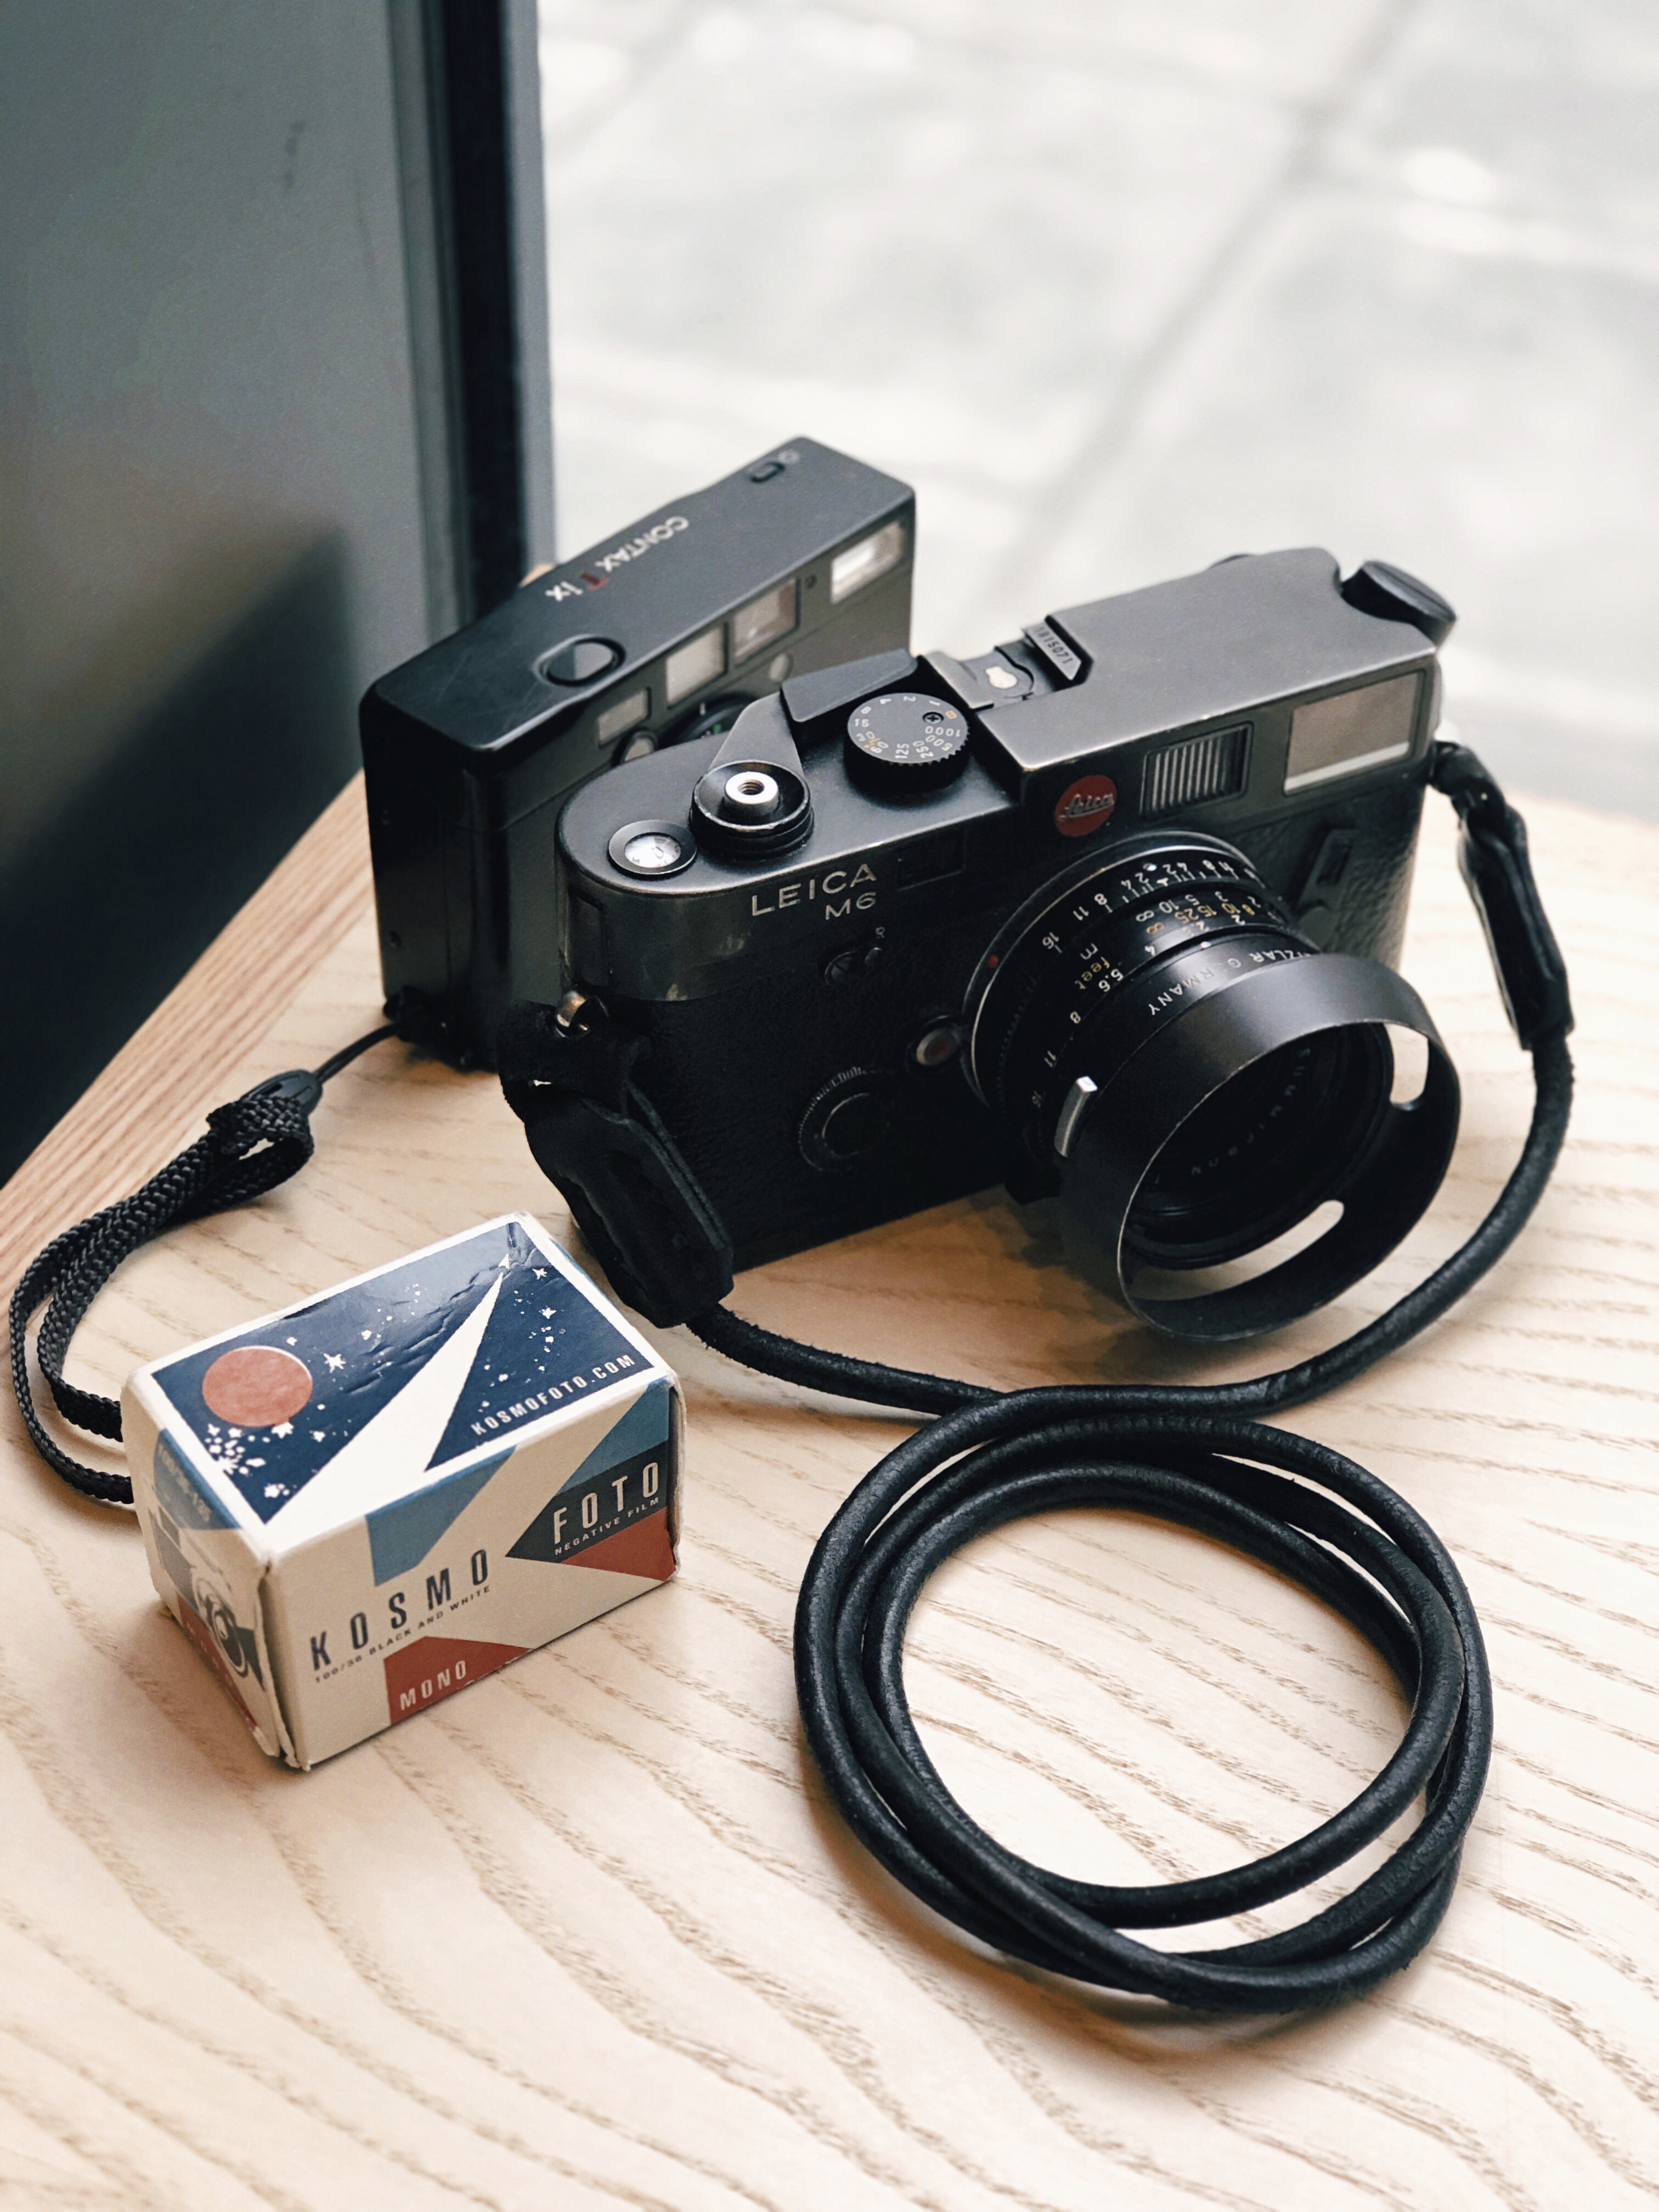 Dan's Leica M6 and Contax T3